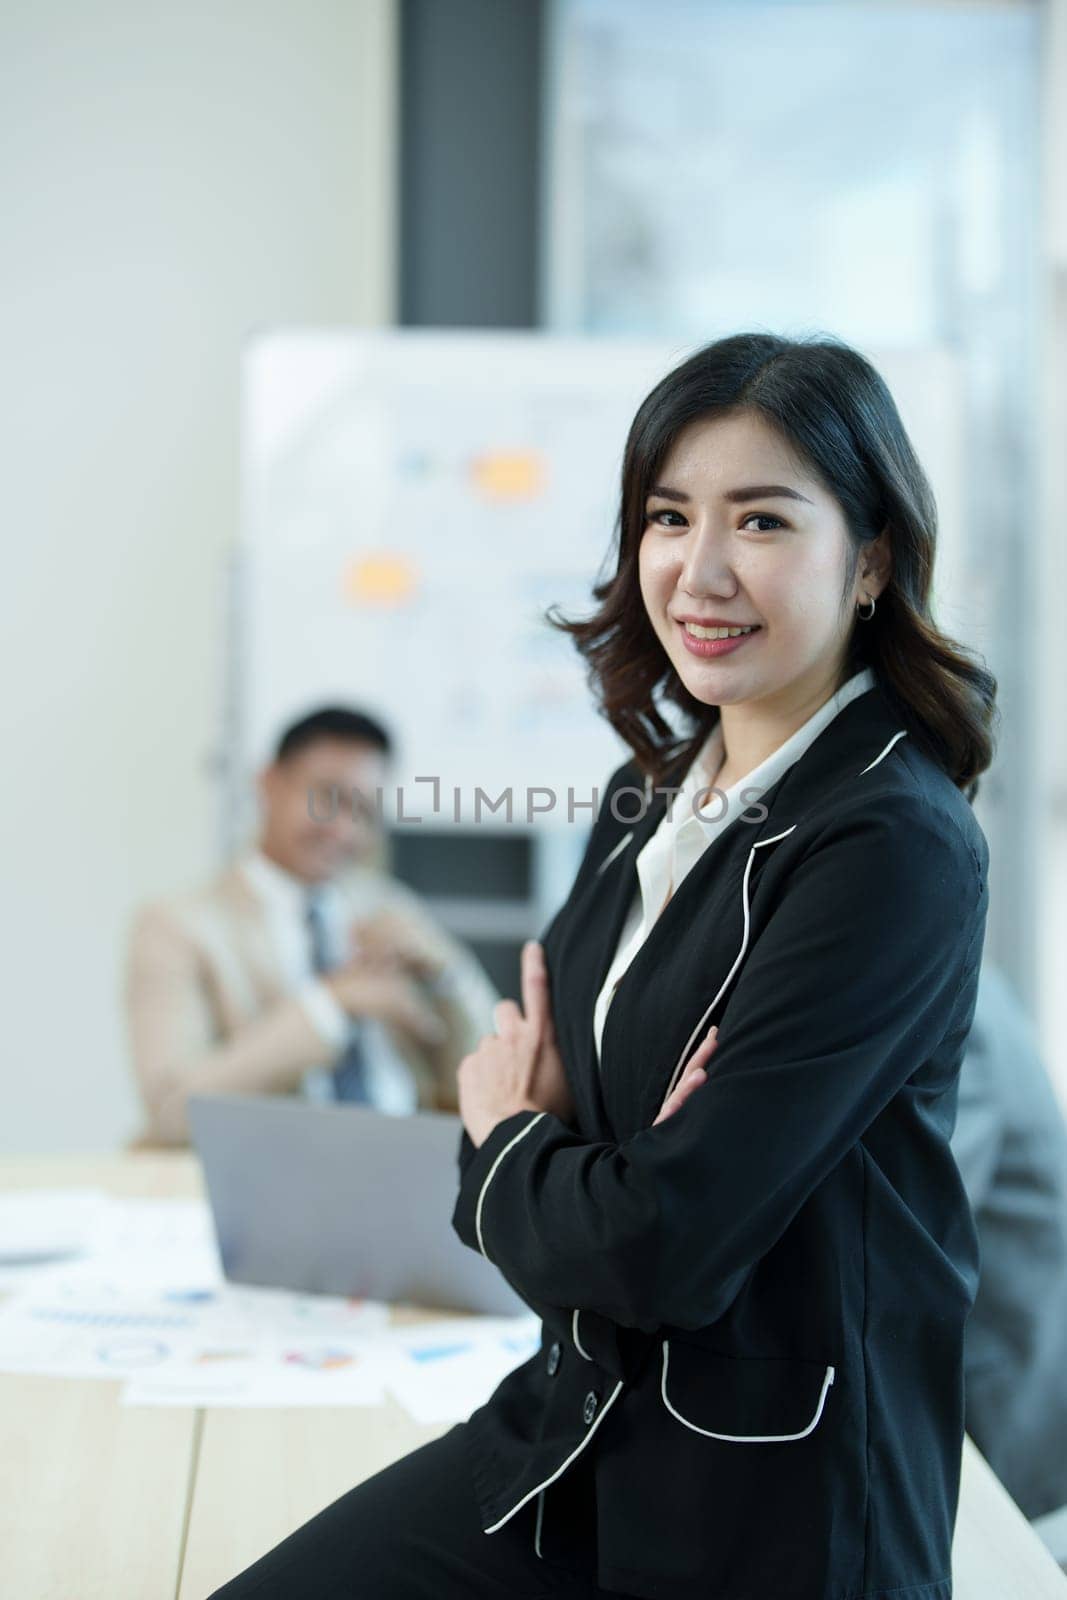 Portrait of a female business owner with a smiling face successfully invests his business in a conference room by Manastrong